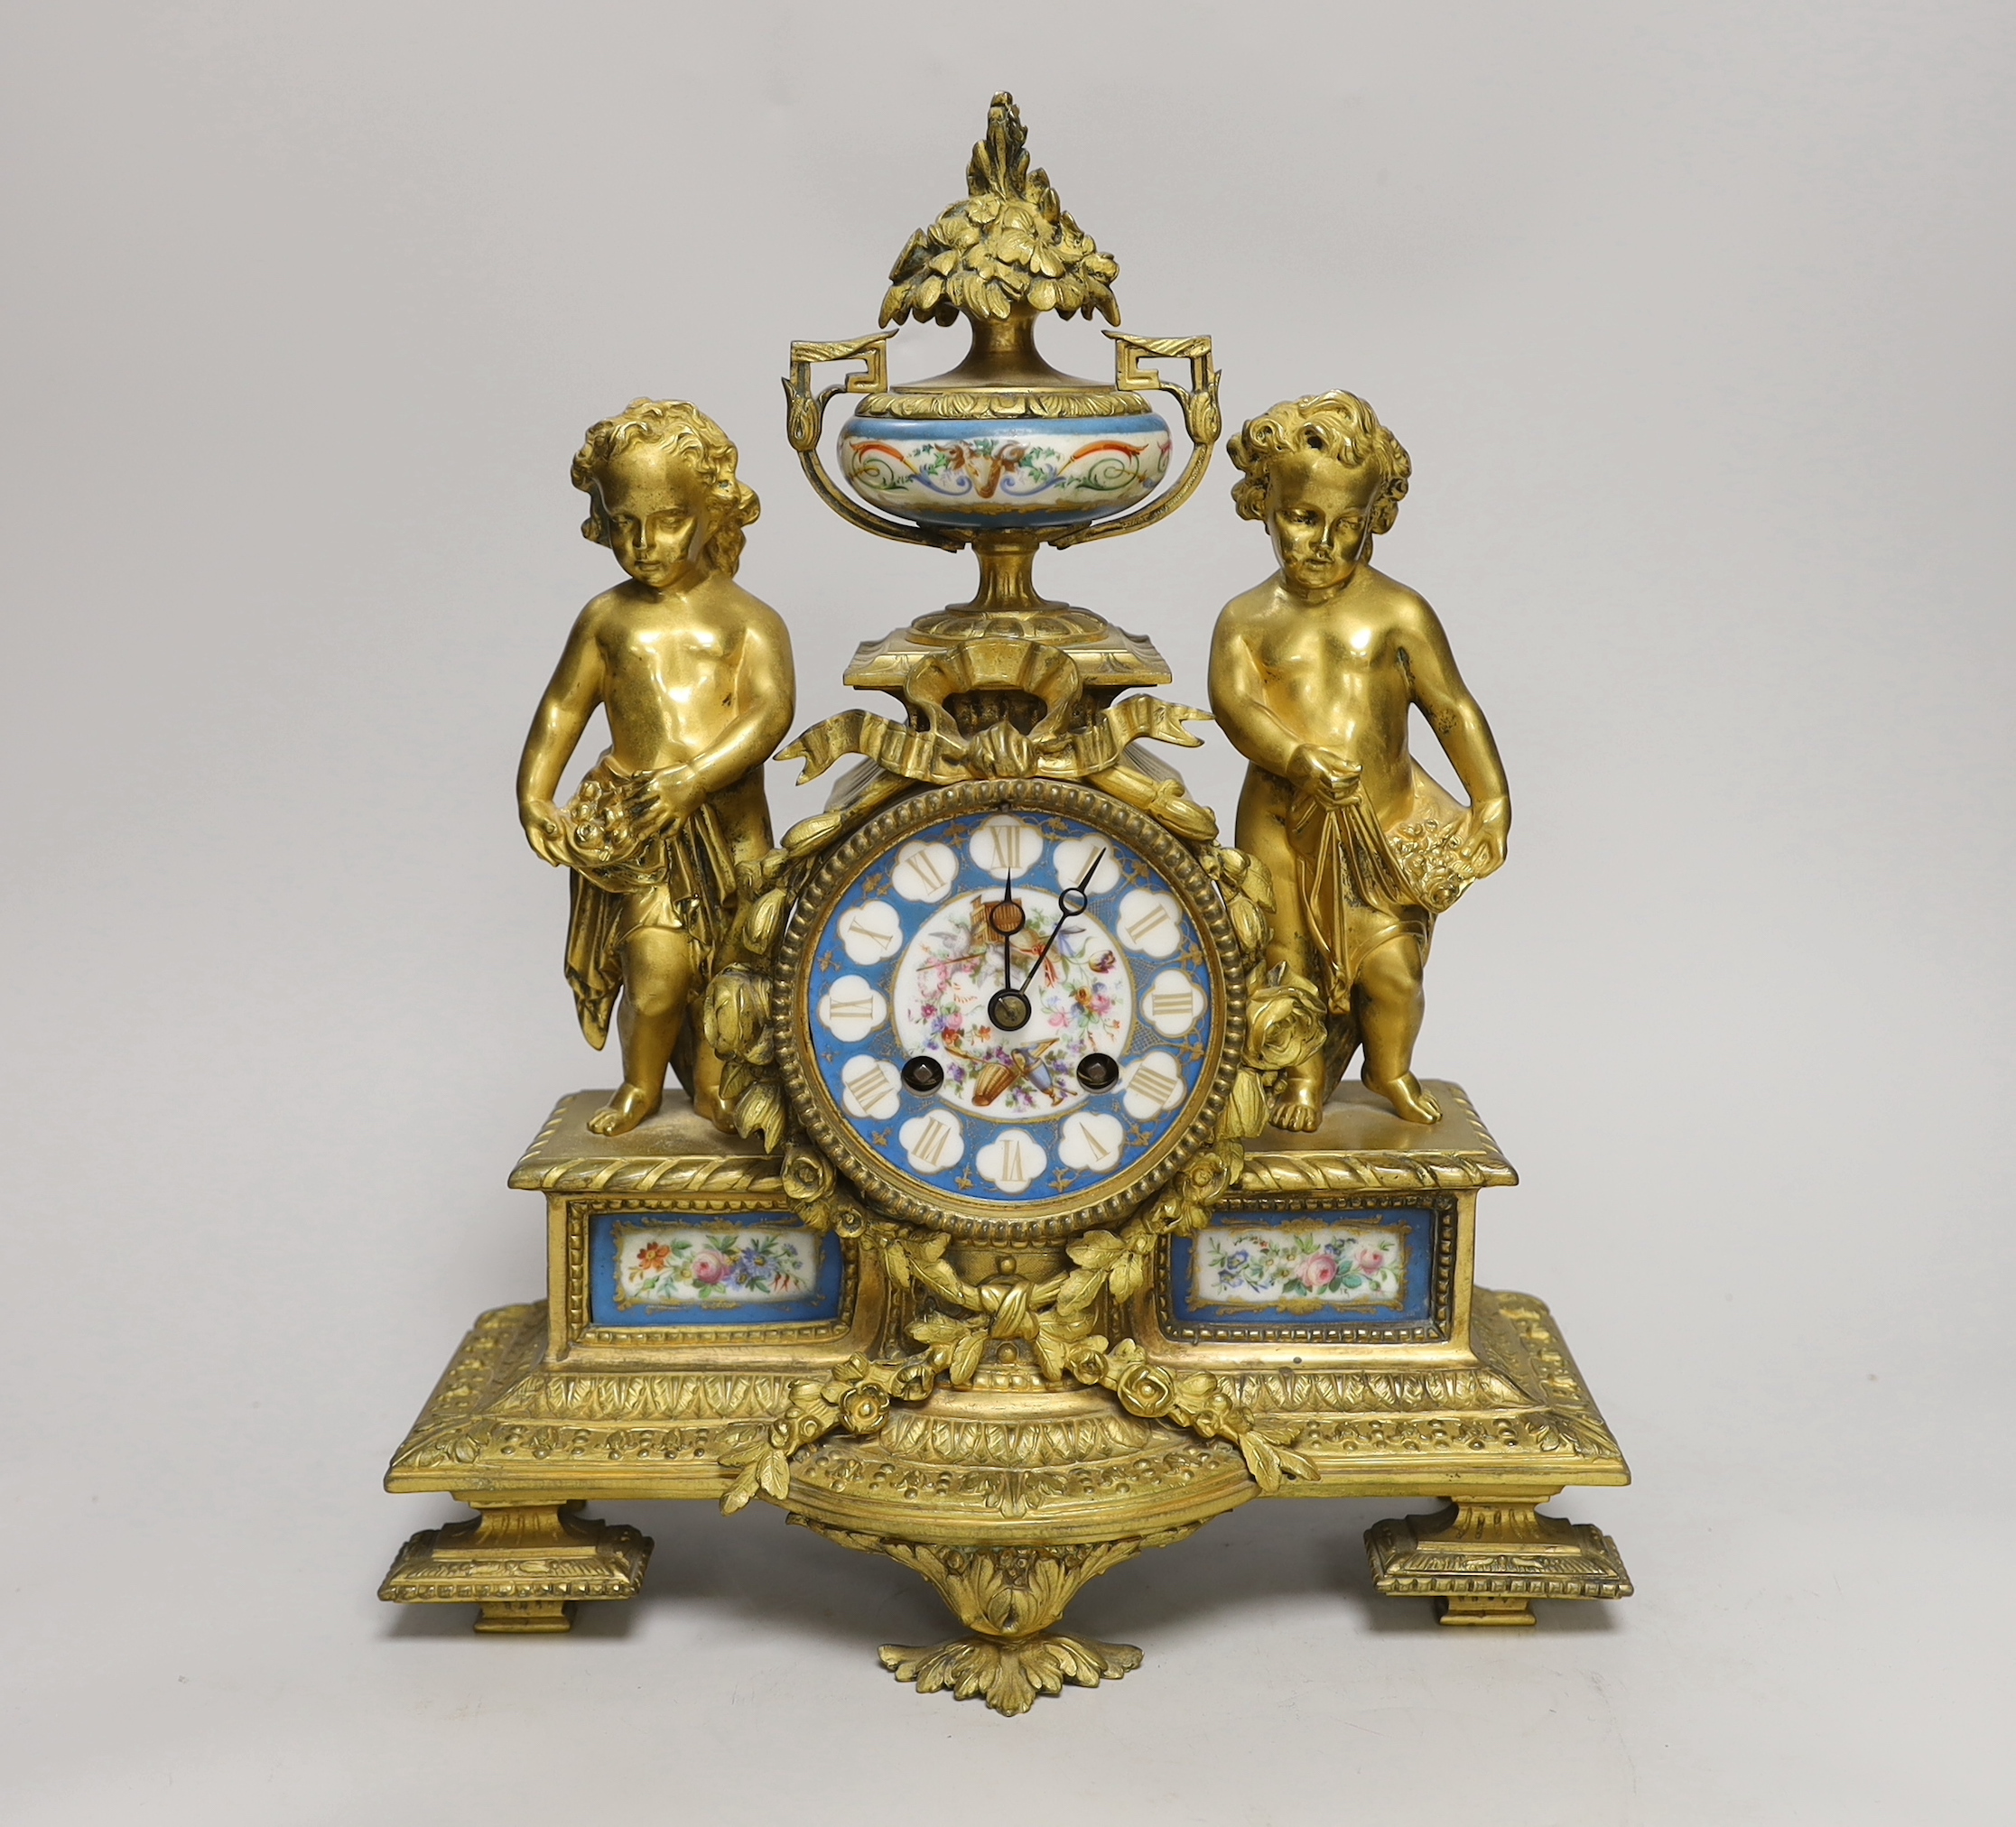 A French decorative ormolu putti mantel clock with porcelain clock face, side panels and urn